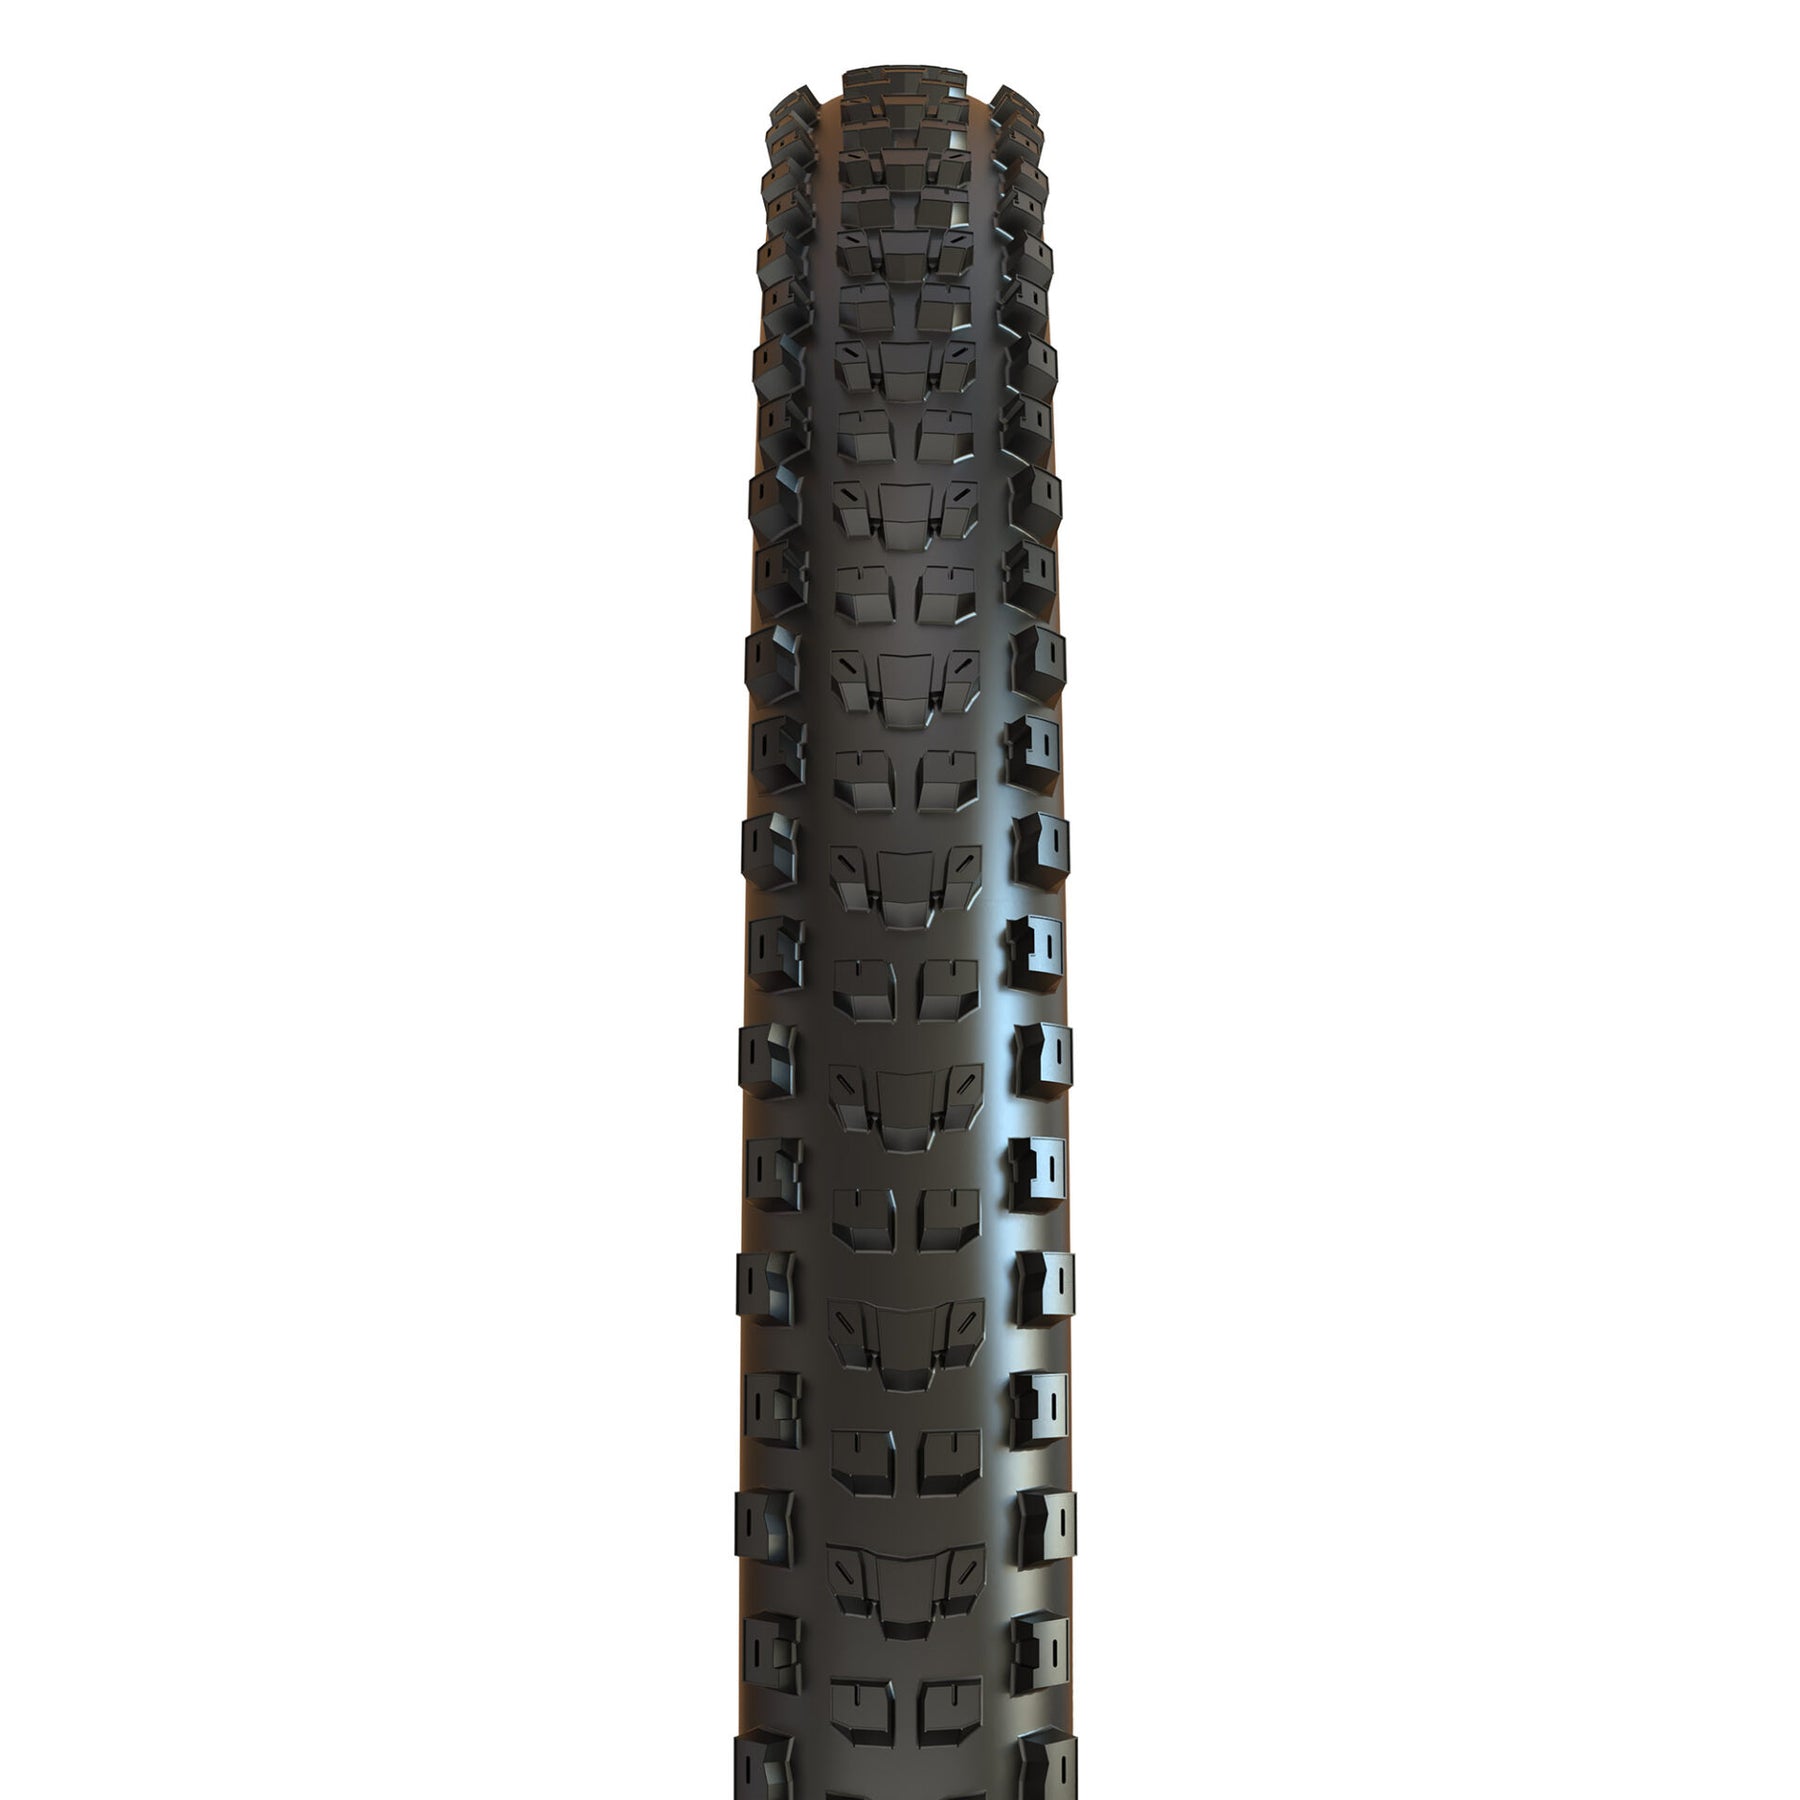 Maxxis Dissector MTB Tyre